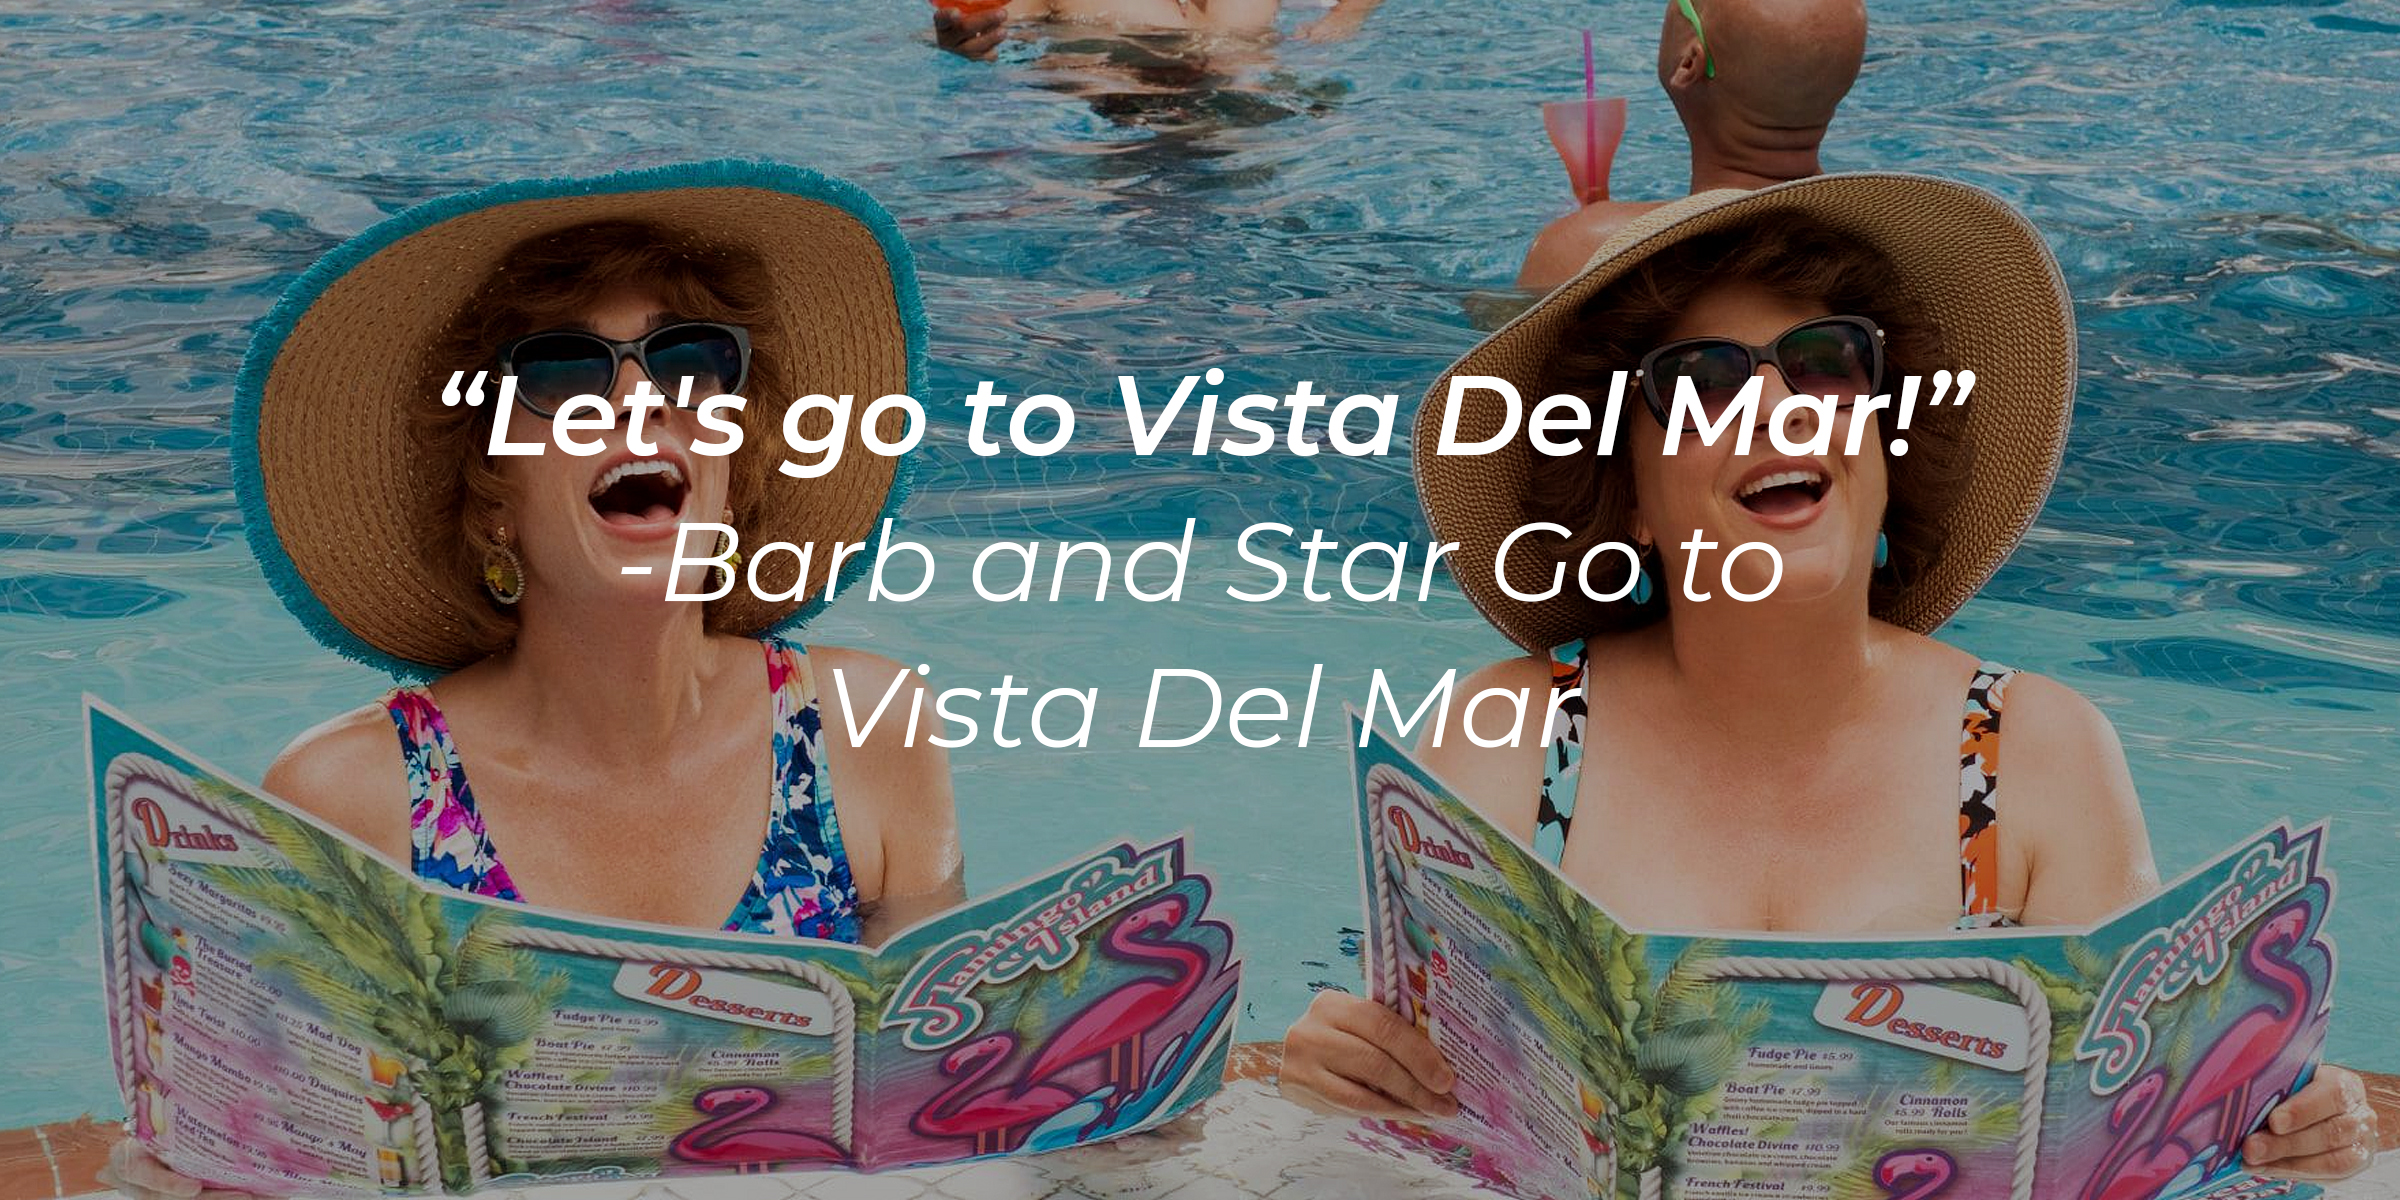 An image of Barb and Star with the quote: "Let's go to Vista Del Mar!" | Source: facebook.com/BarbAndStar